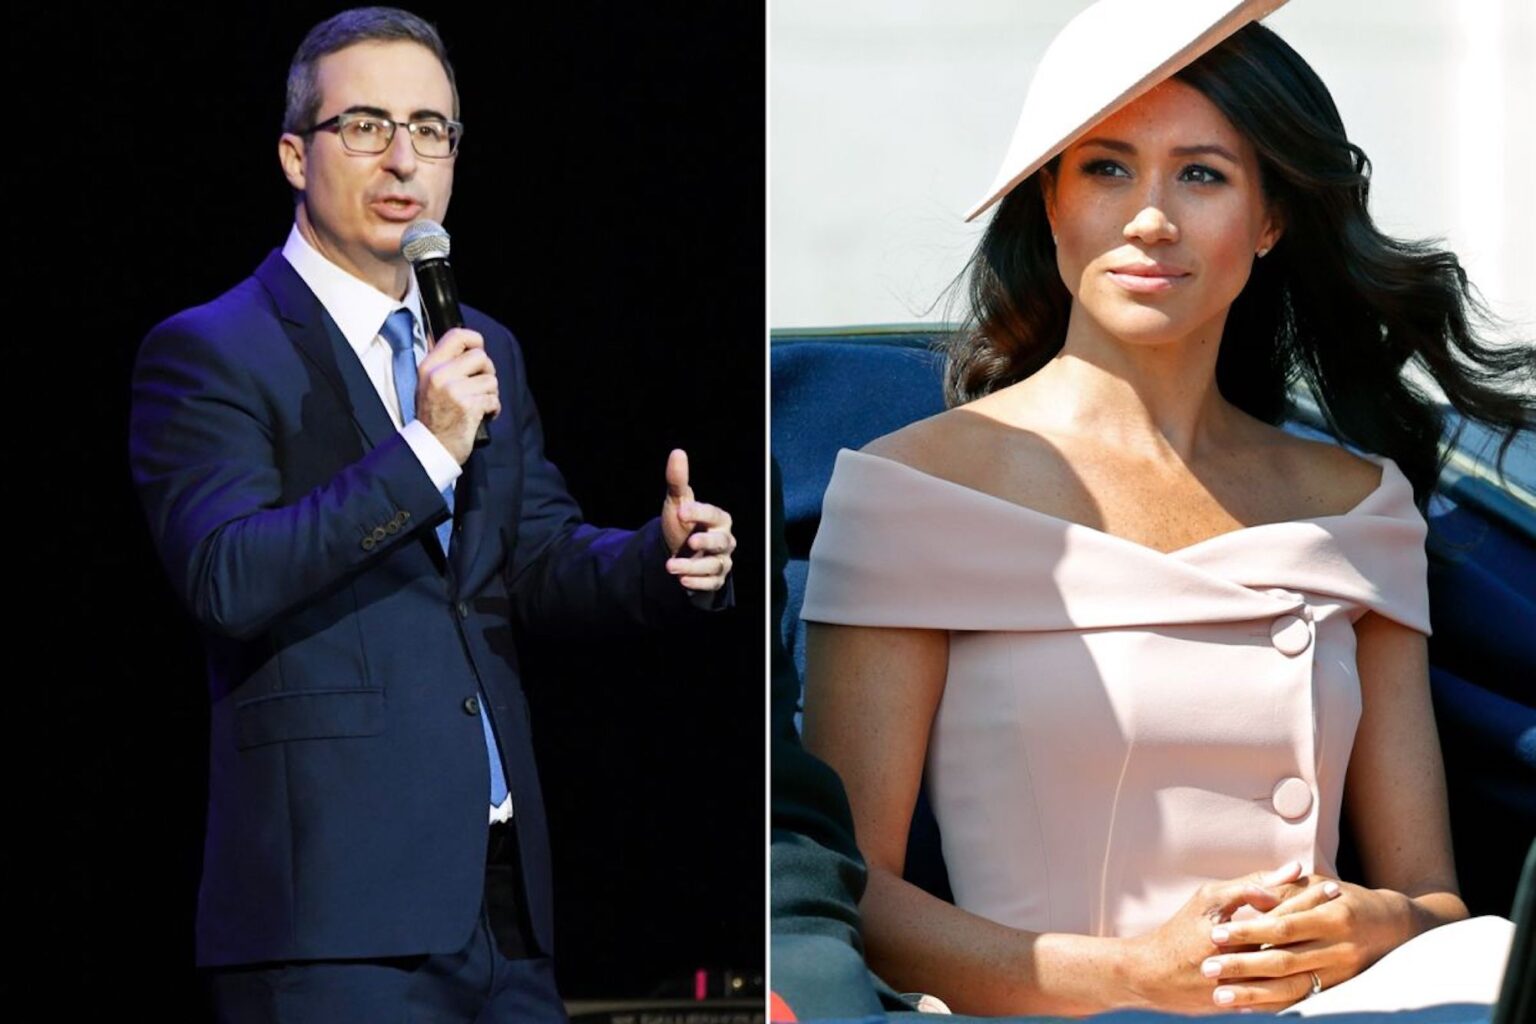 Old comments of John Oliver about Meghan Markle have surfaced online. Read on to see if this comedy news maverick predicted the exit of this royal couple.